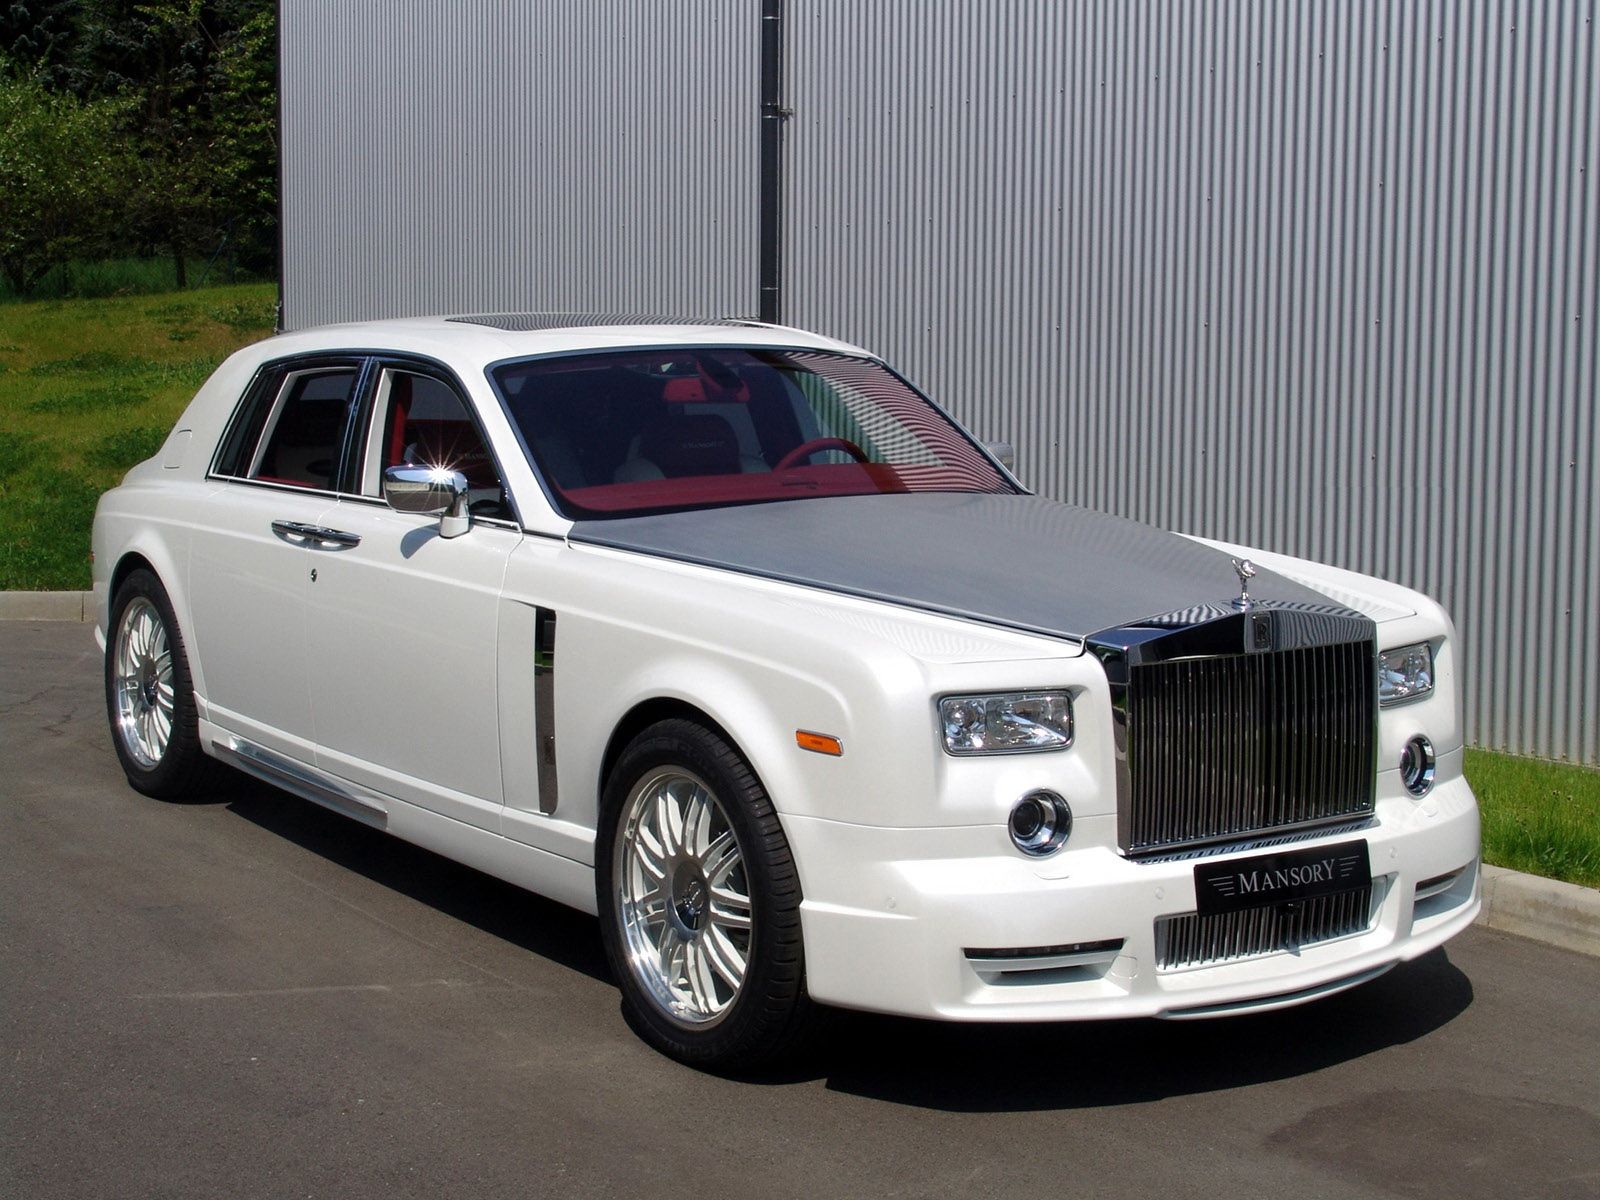 Wallpapers Rolls Royce Cars Image Download